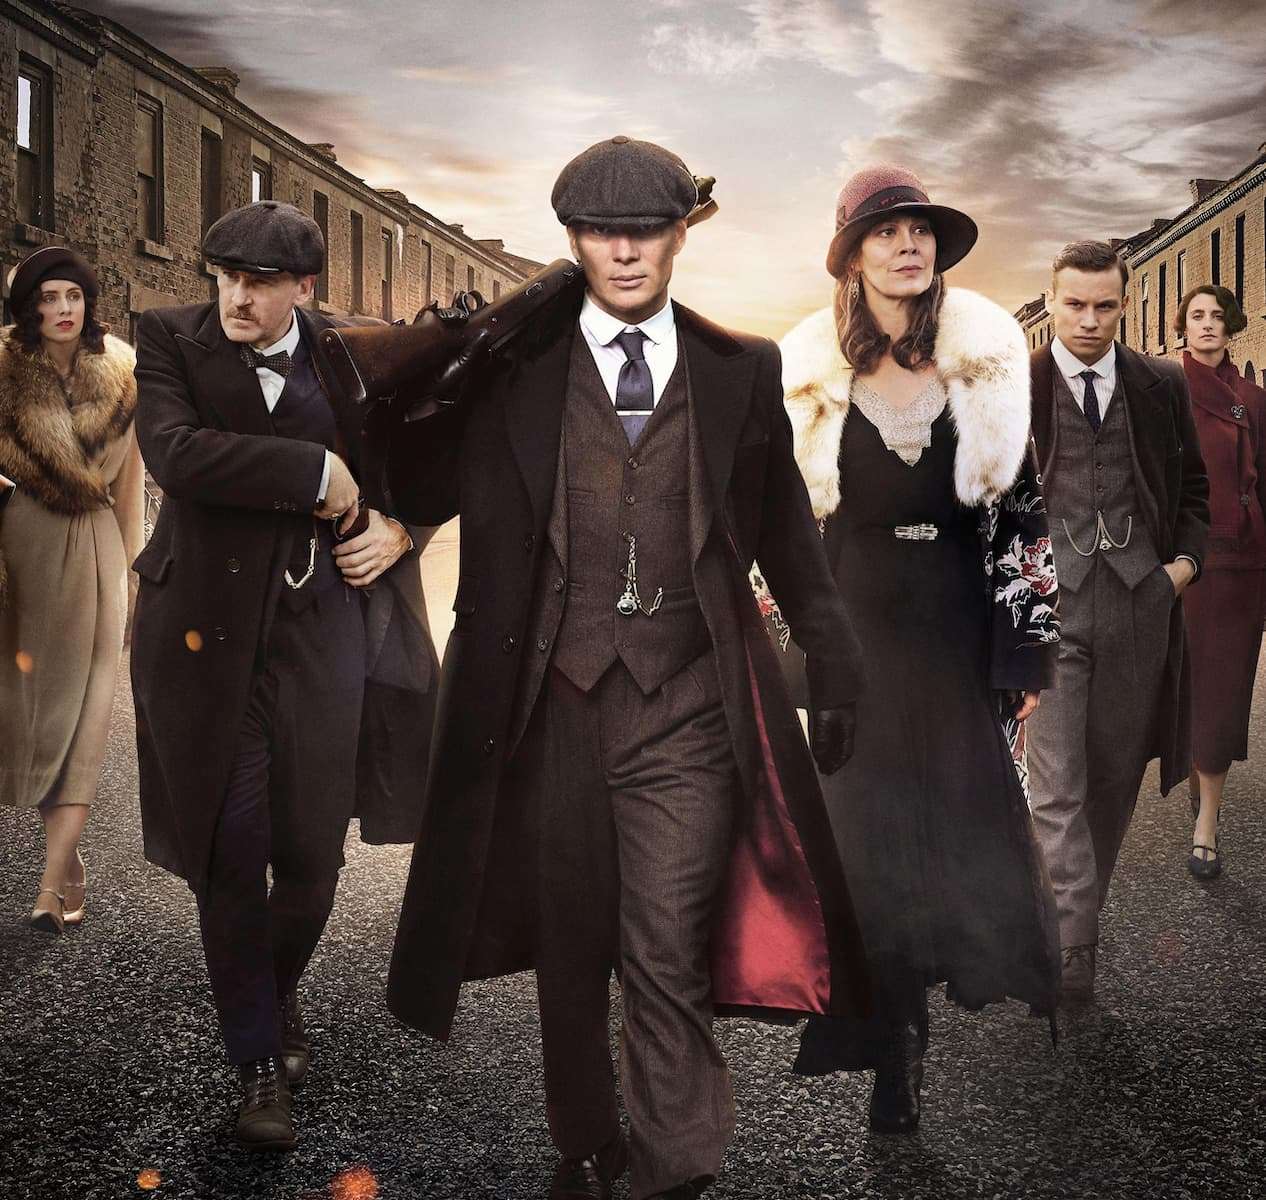 Netflix and Skill - Peaky Blinders contest open for submissions